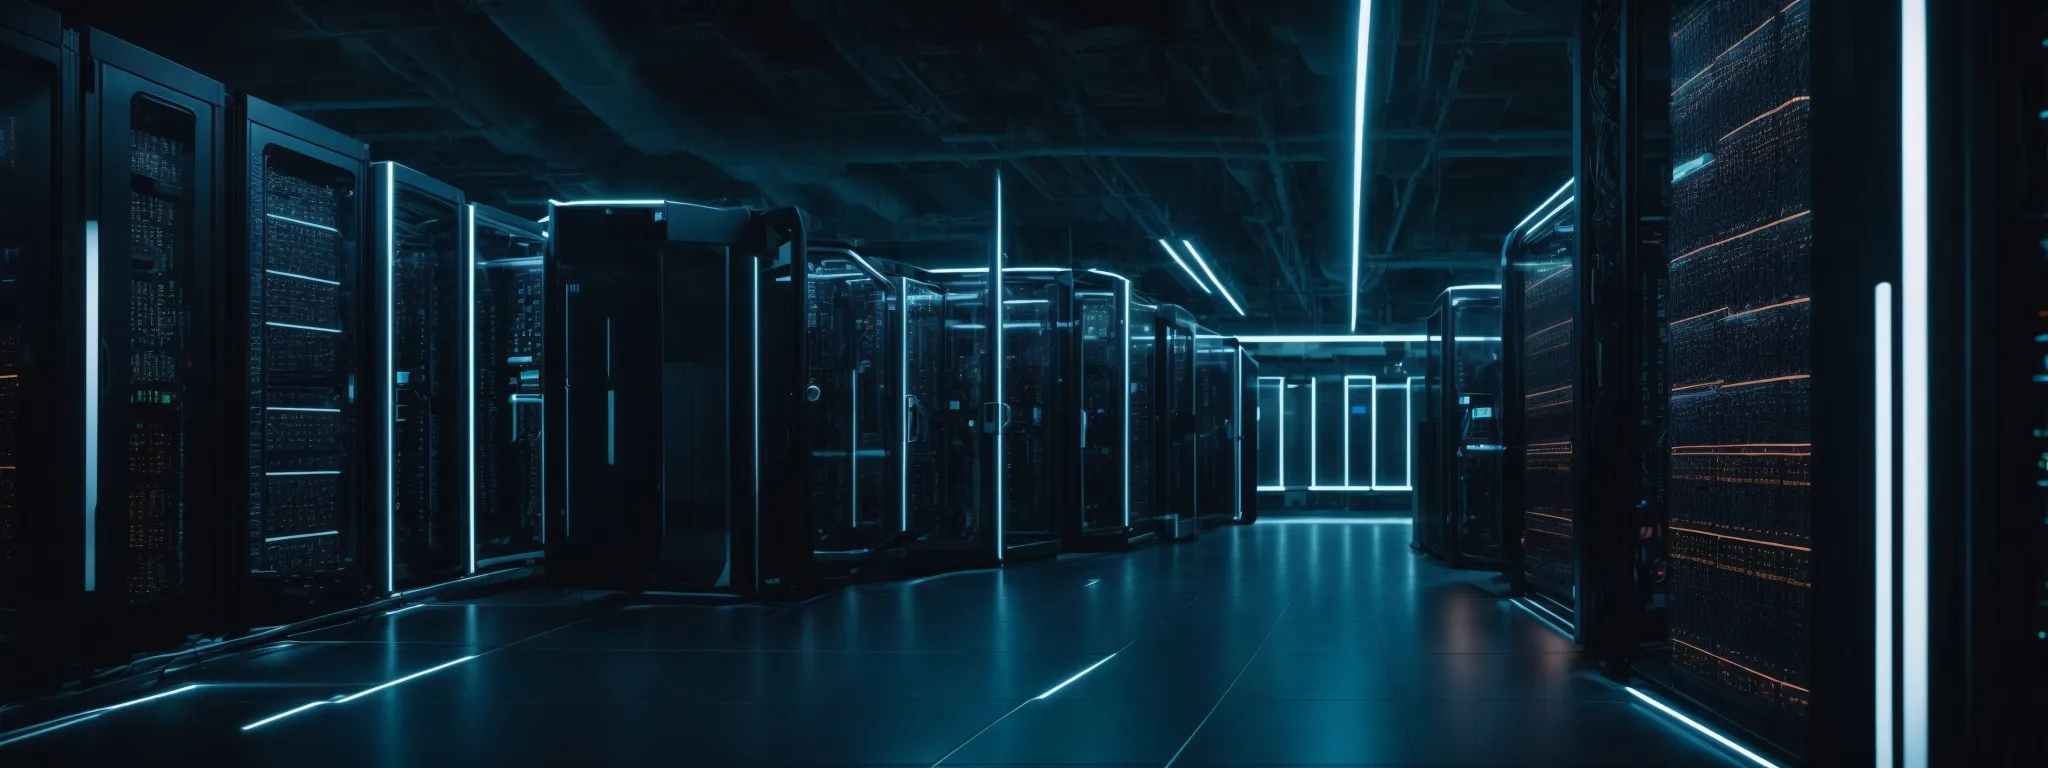 a futuristic data center with rows of servers and glowing lights representing the digital infrastructure of the web.